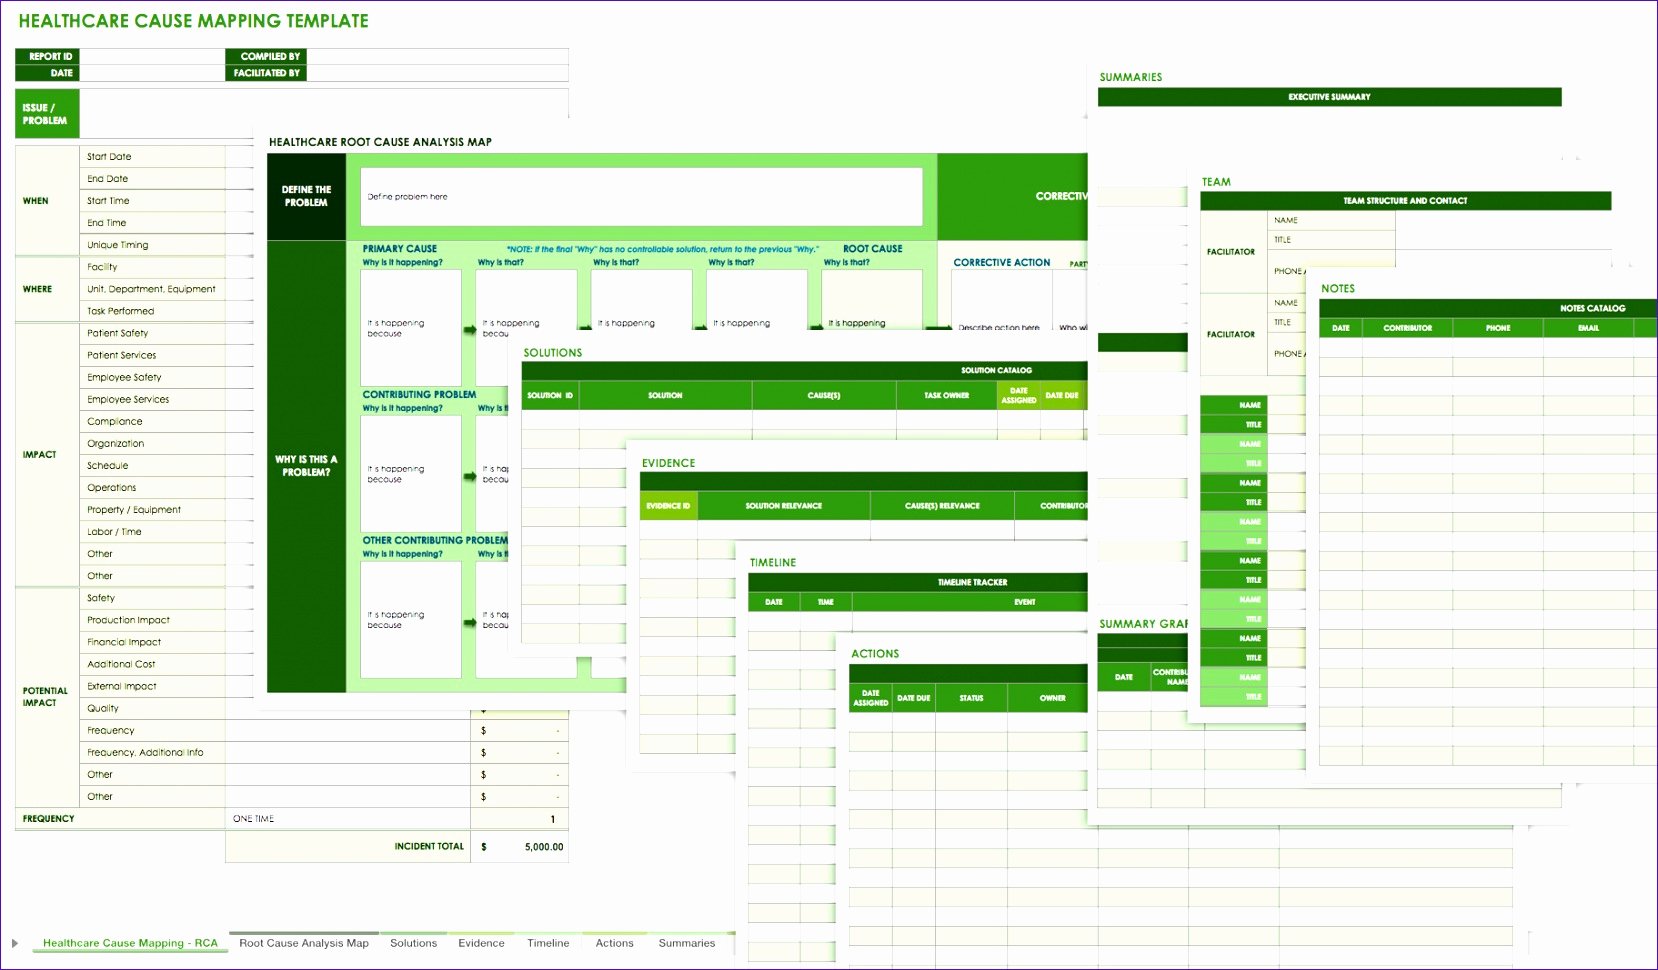 Training Matrix Template Free Excel Awesome 9 Free Training Matrix Template Excel Exceltemplates